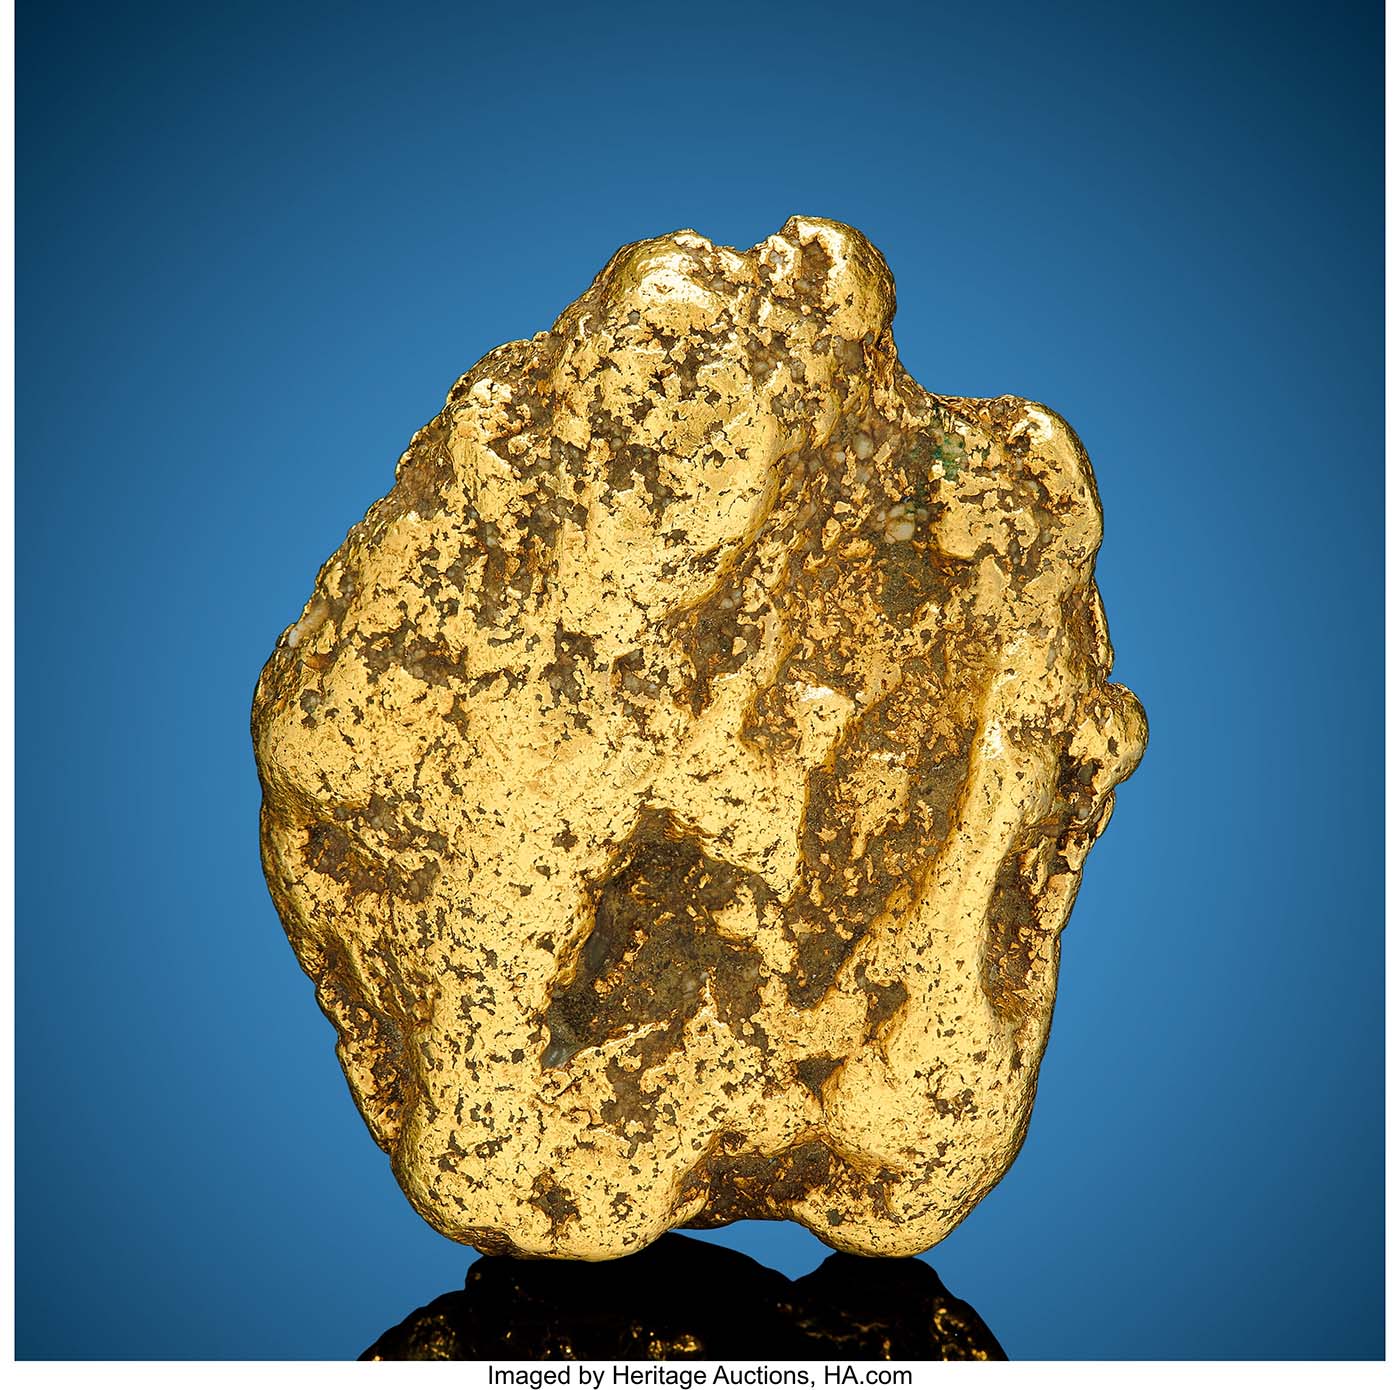 Family Discovers 2 Gold Nuggets Worth More Than $252,000